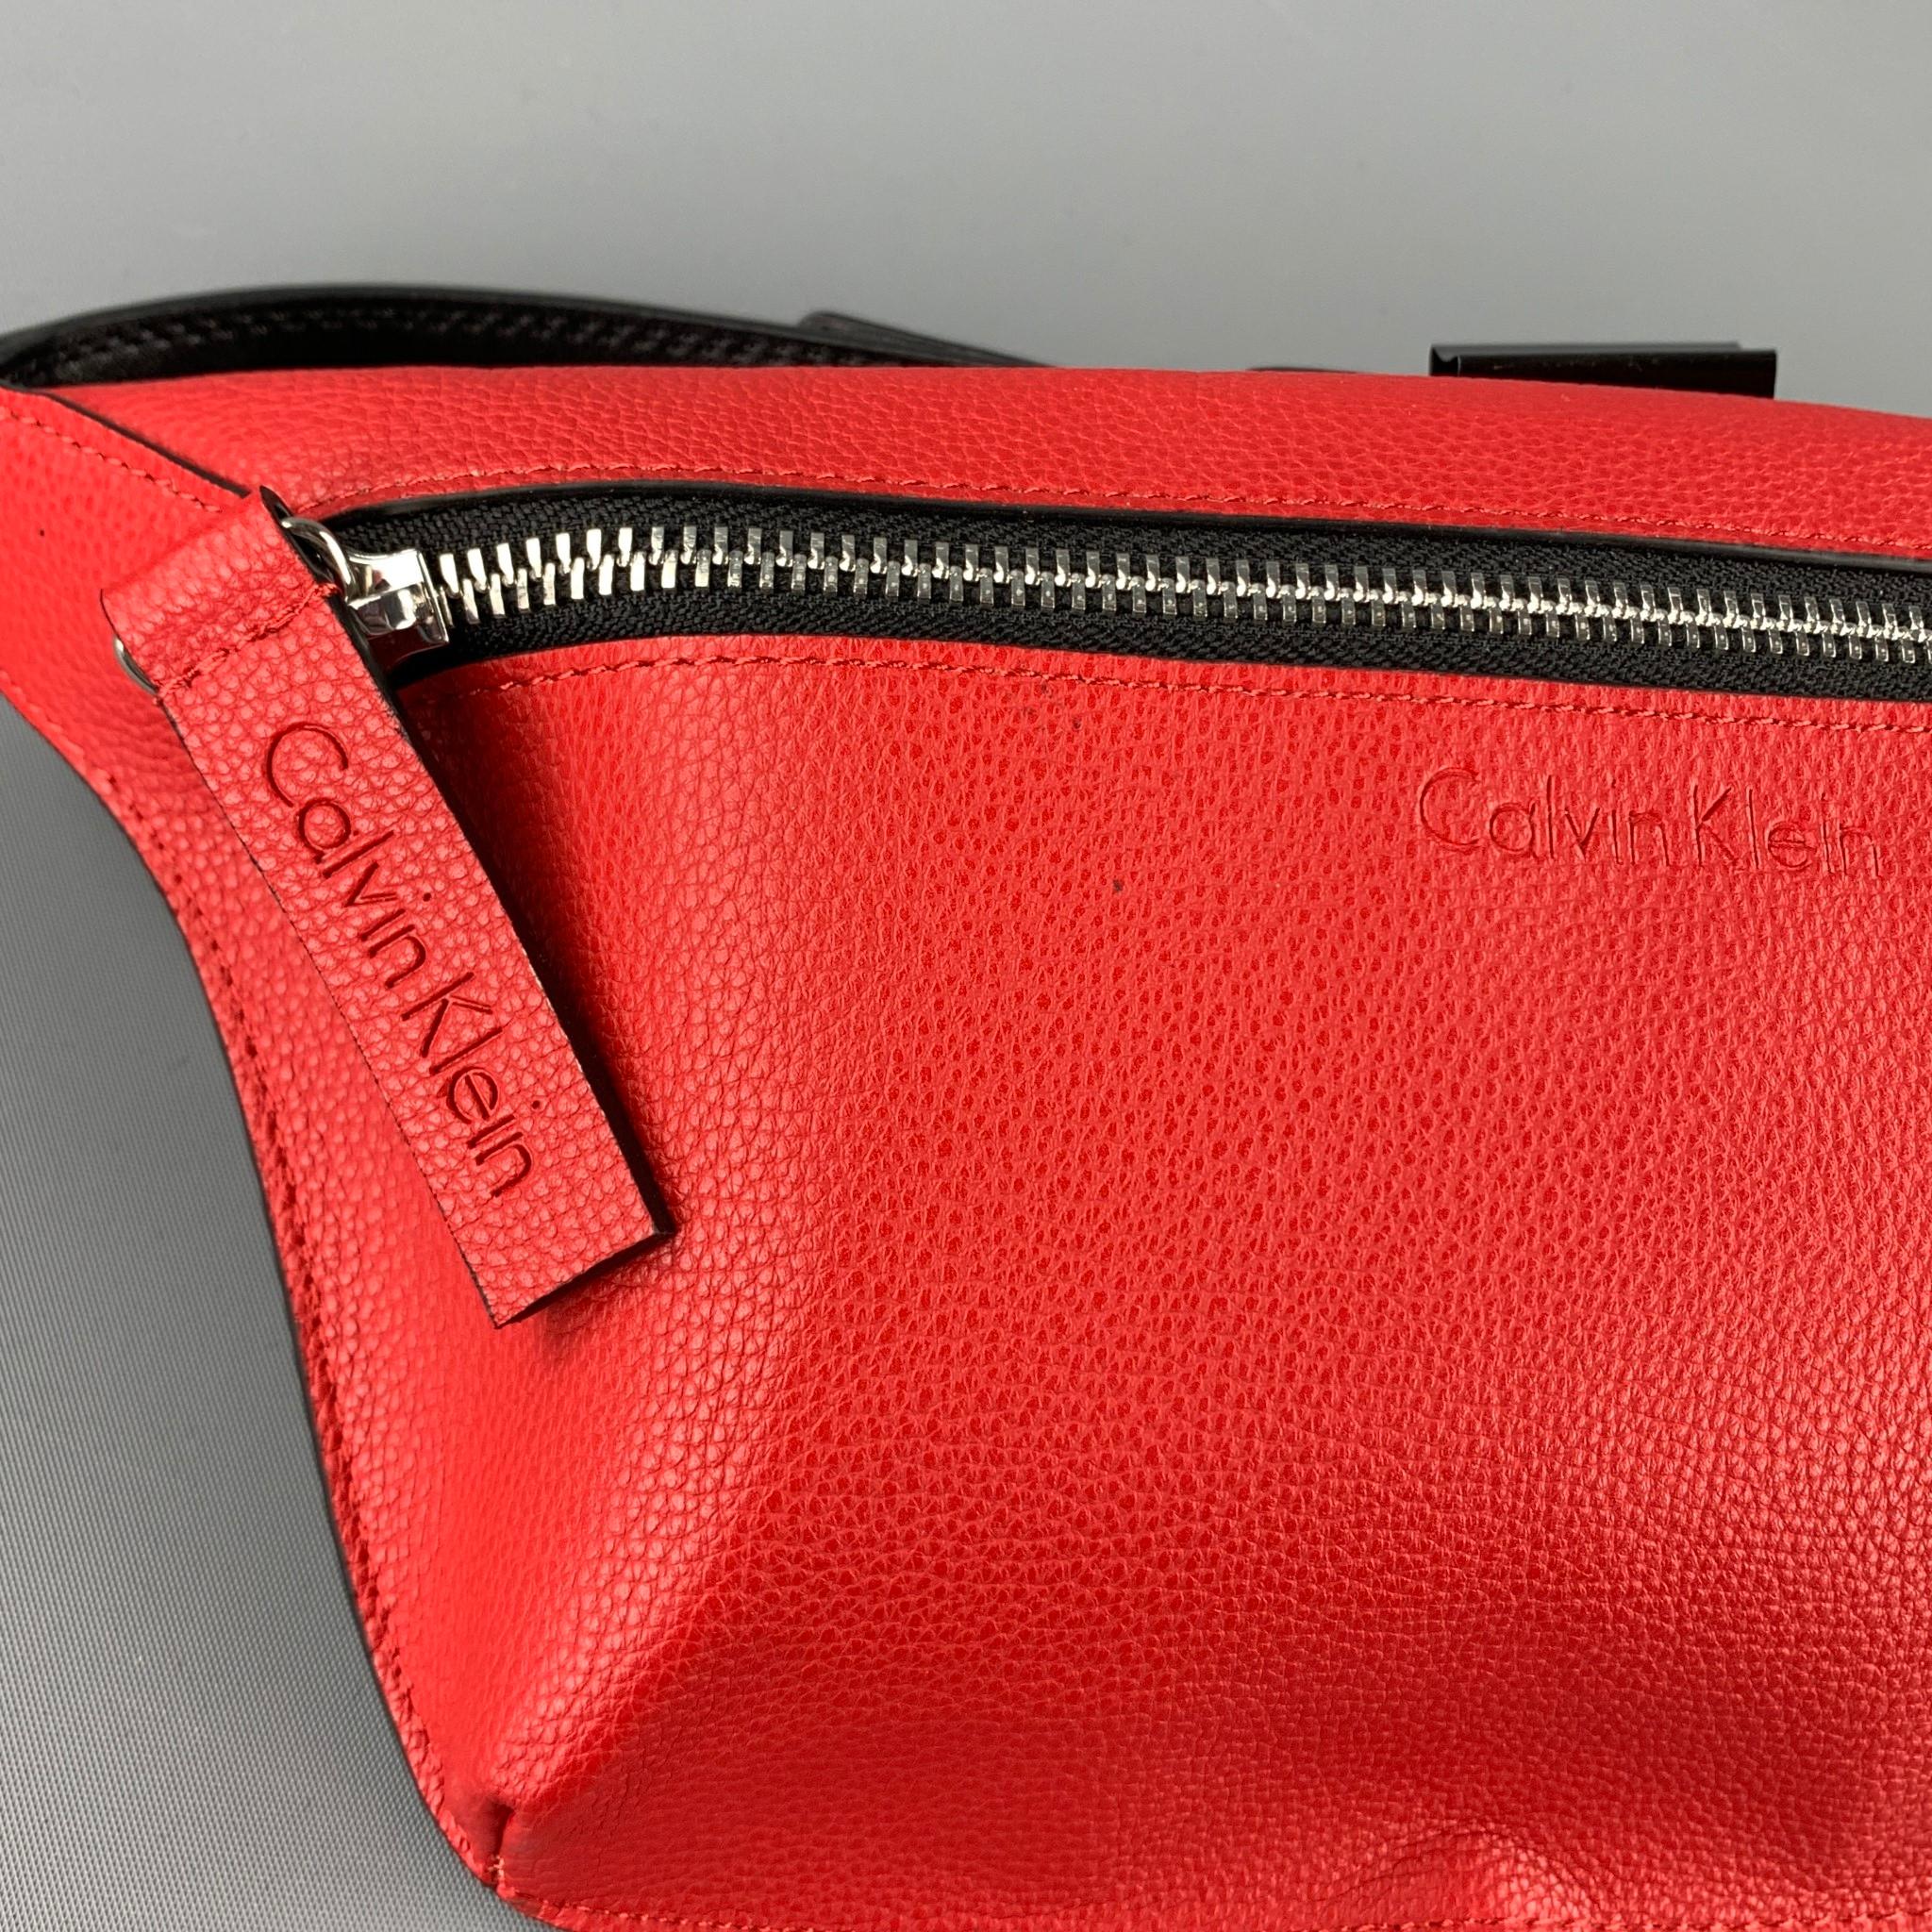 CALVIN KLEIN fanny pack comes in a red pebble grain leather featuring an adjustable strap closure and a front zip up closure.

Brand New. 

Measurements:

Length: 12 in.
Width: 1 in.
Height: 5.5 in.